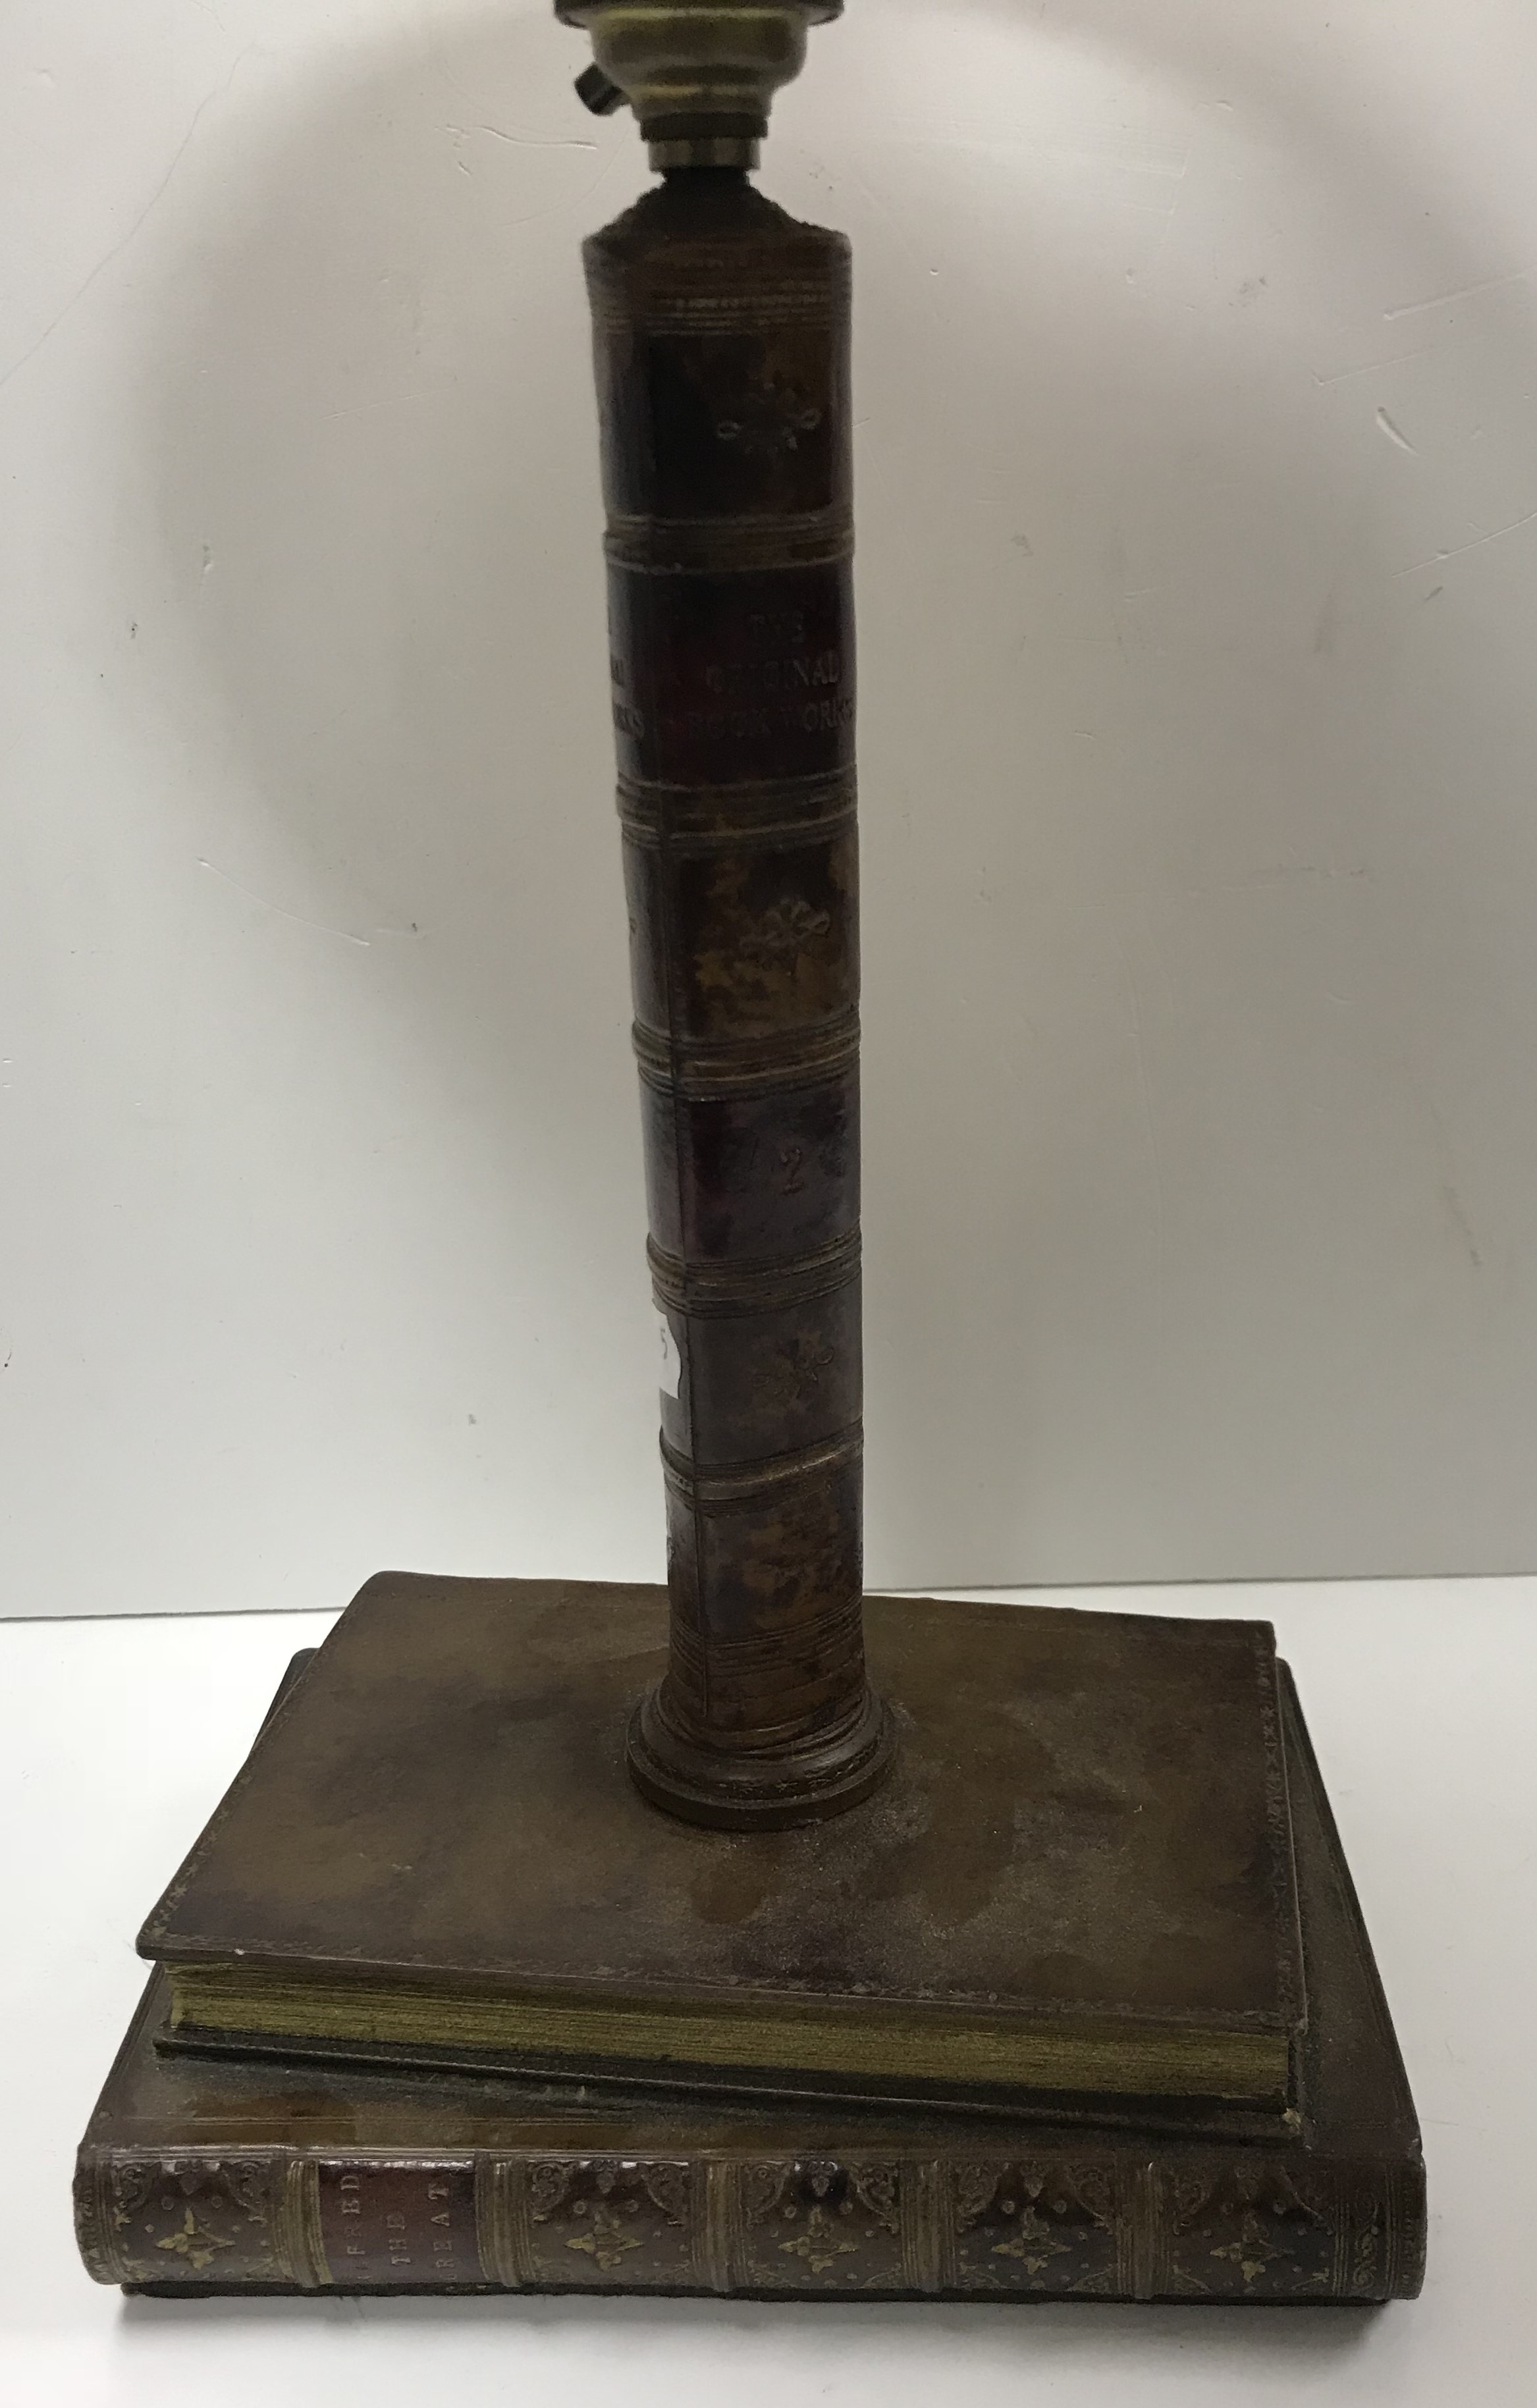 A decorative table lamp as book spines "Original Bookworks - 2" on a base of two books "Goldsmiths - Image 2 of 5